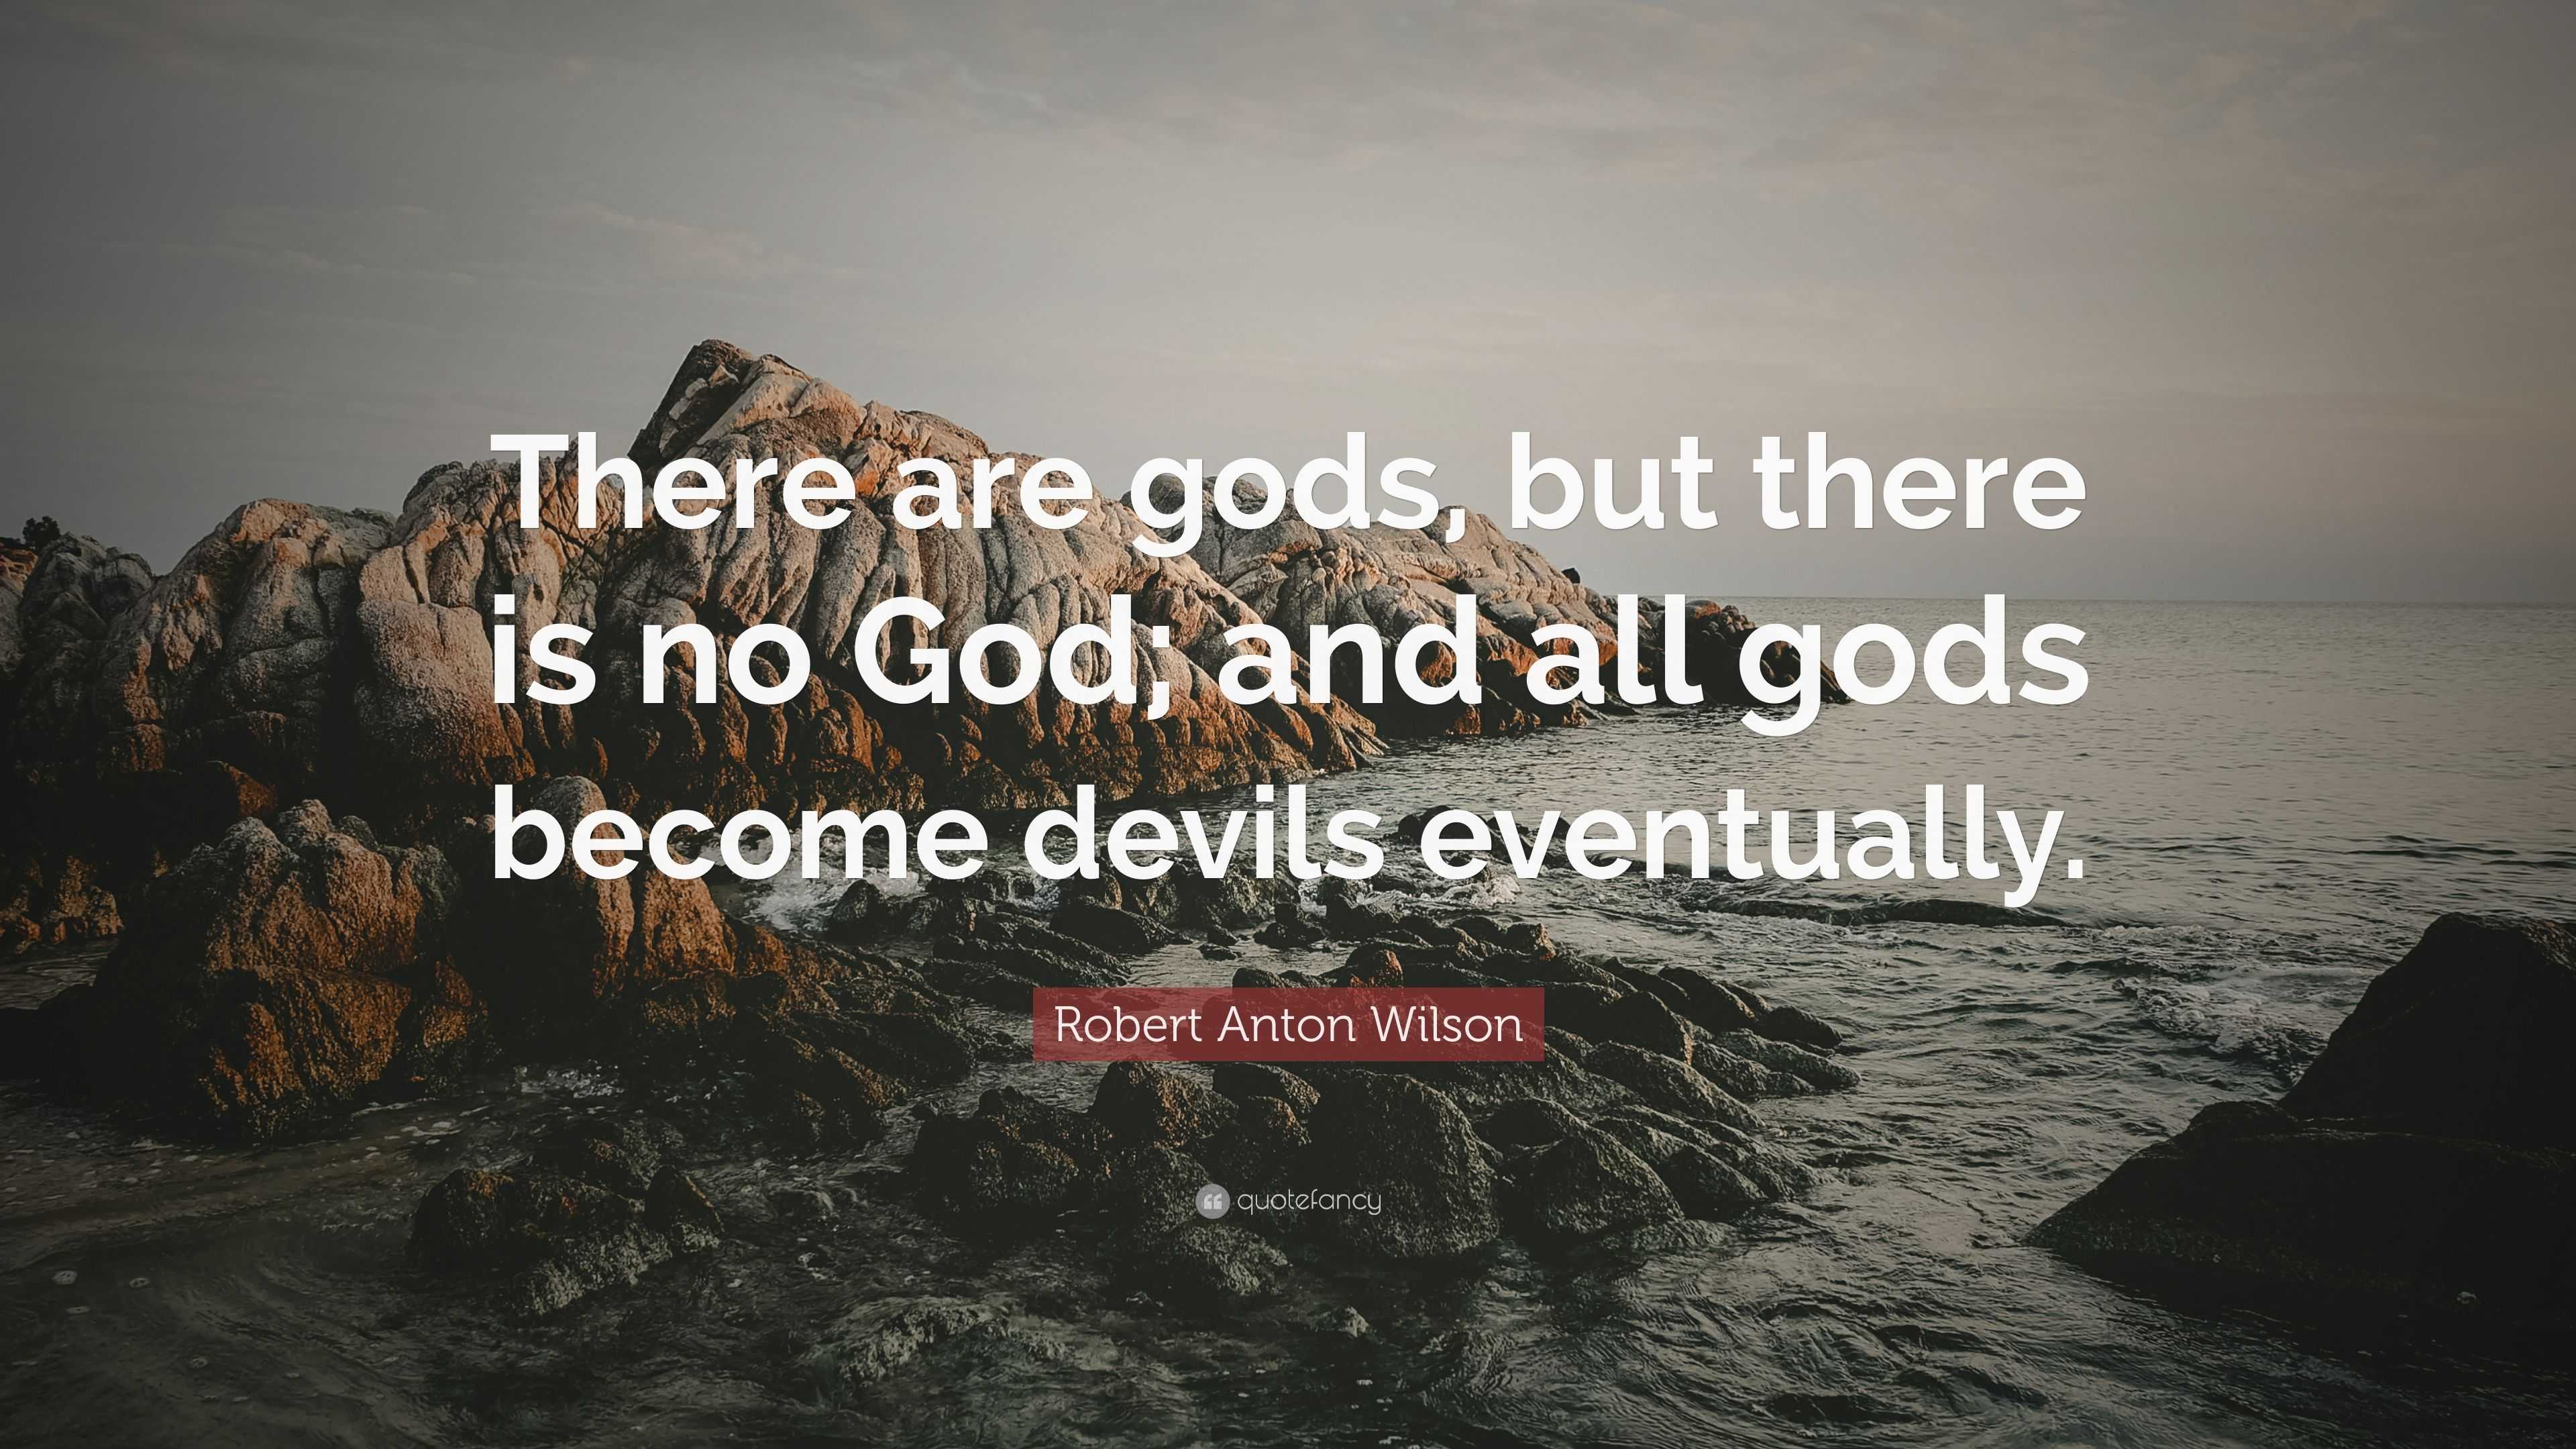 Robert Anton Wilson Quote There Are Gods But There Is No God And All Gods Become